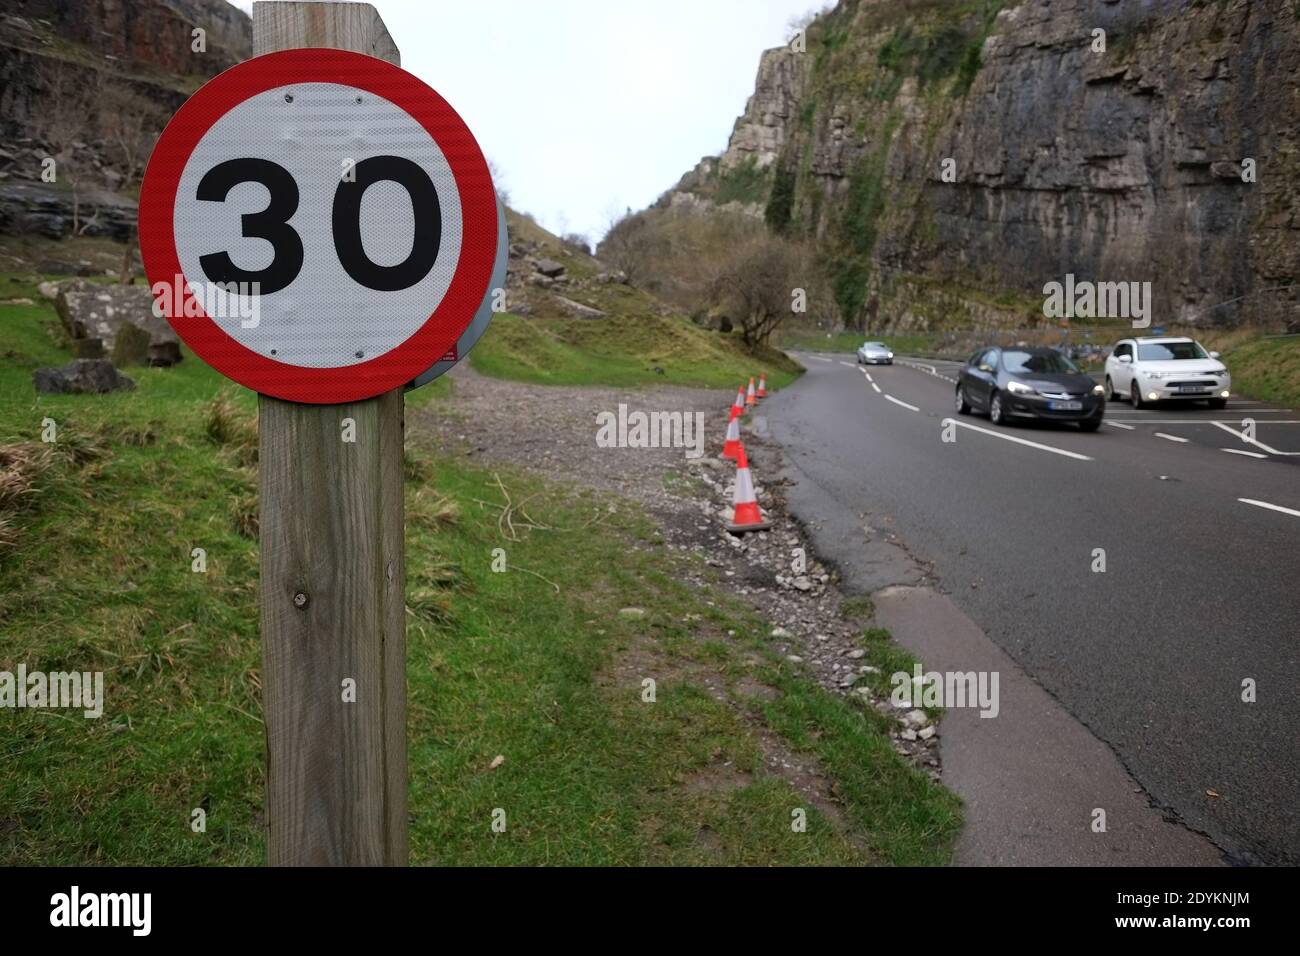 December 2020 - 30 mph speed limit sign in the Gorge, Cheddar, Somerset,UK Stock Photo